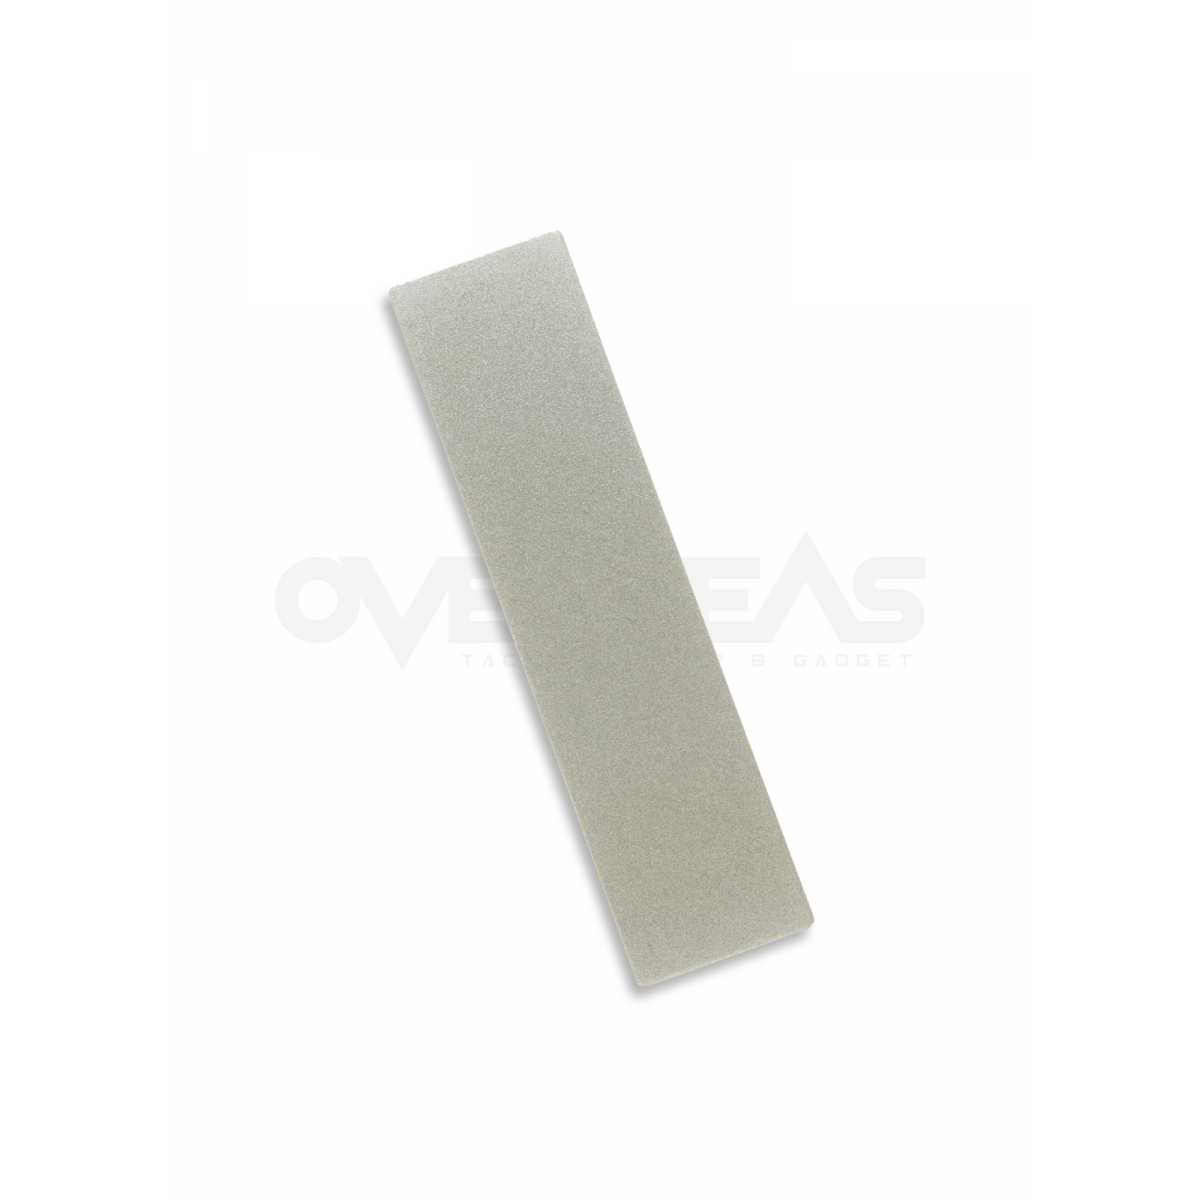 Replacement Coarse Diamond Plate 320 Grit For Guided Field Sharpener 2.2.1,PP0002885